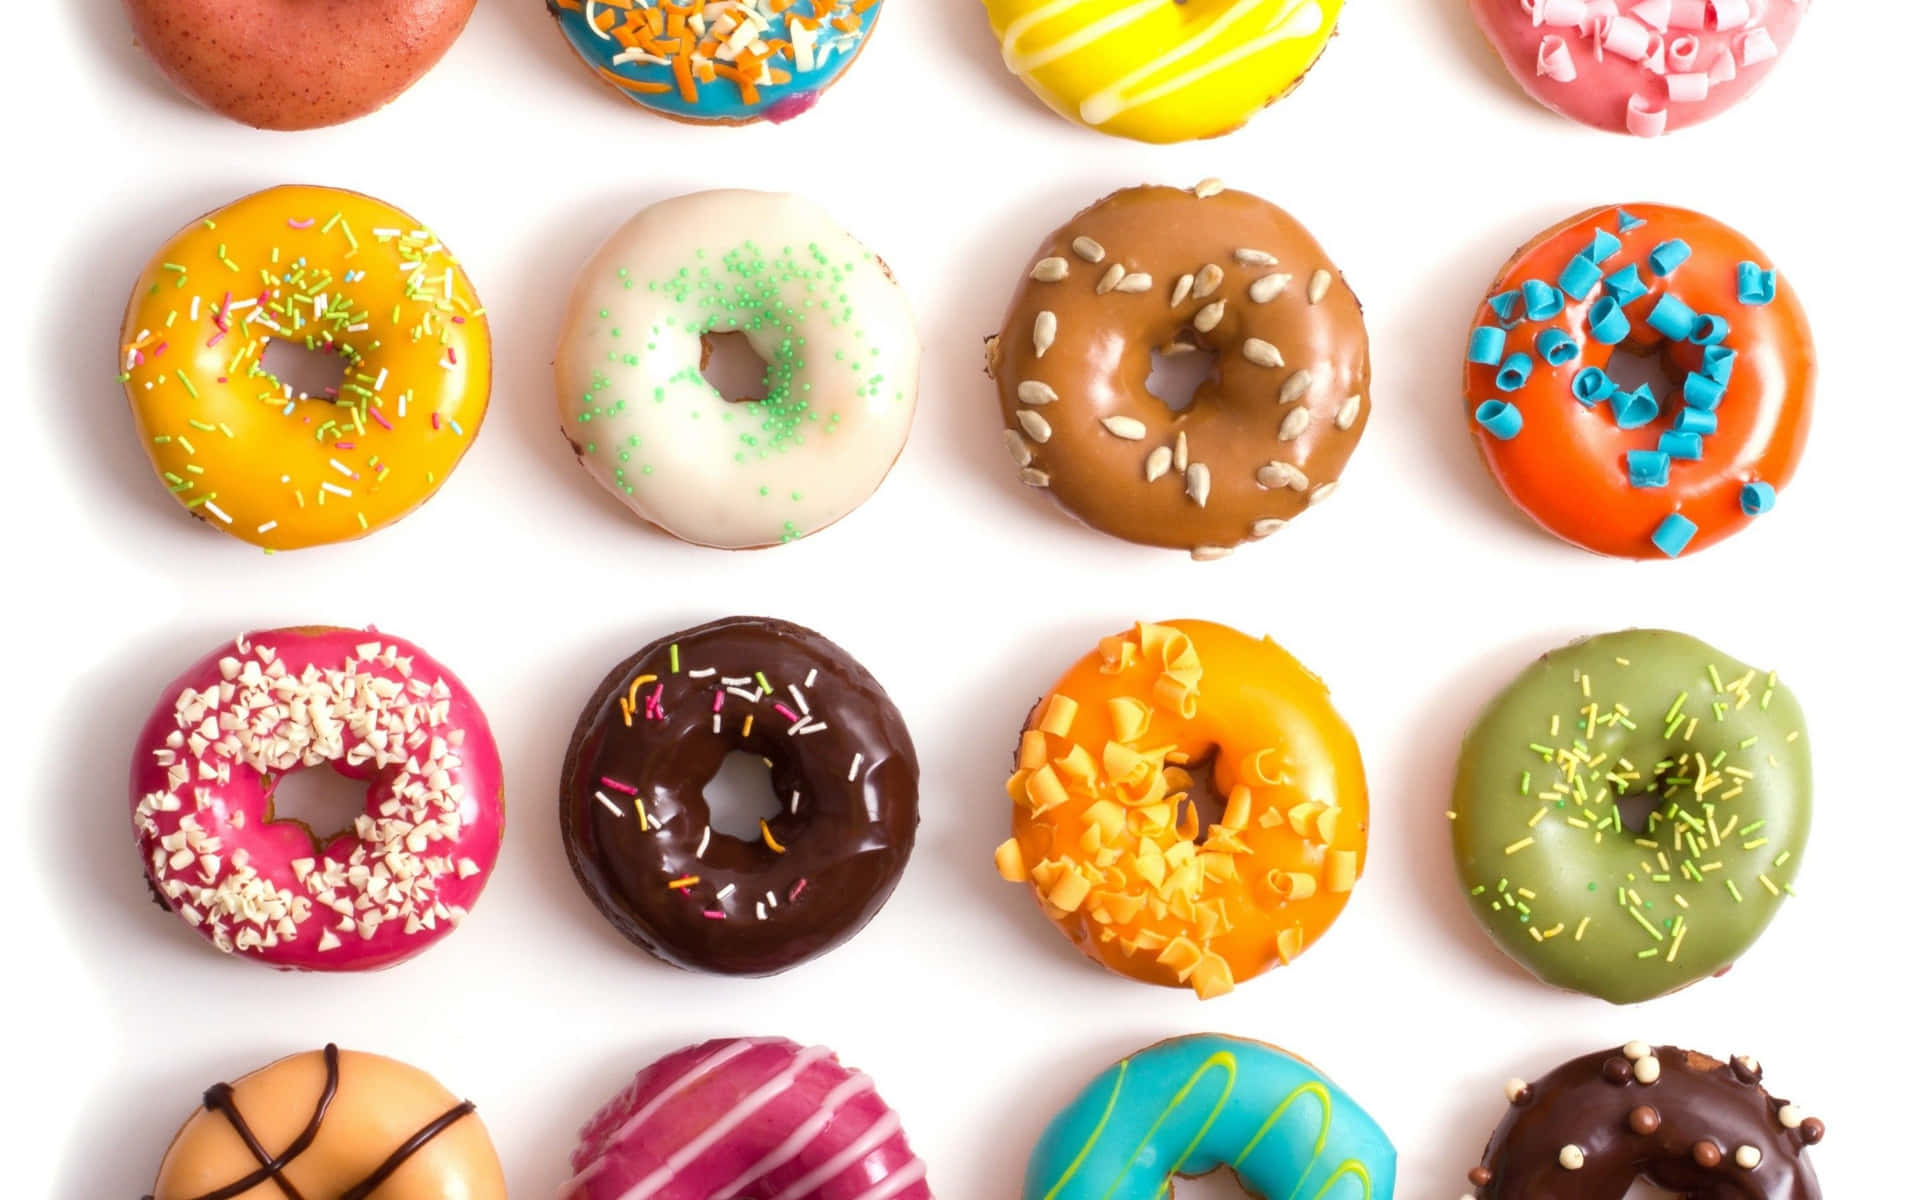 A Mouthwatering Display Of Assorted Donuts